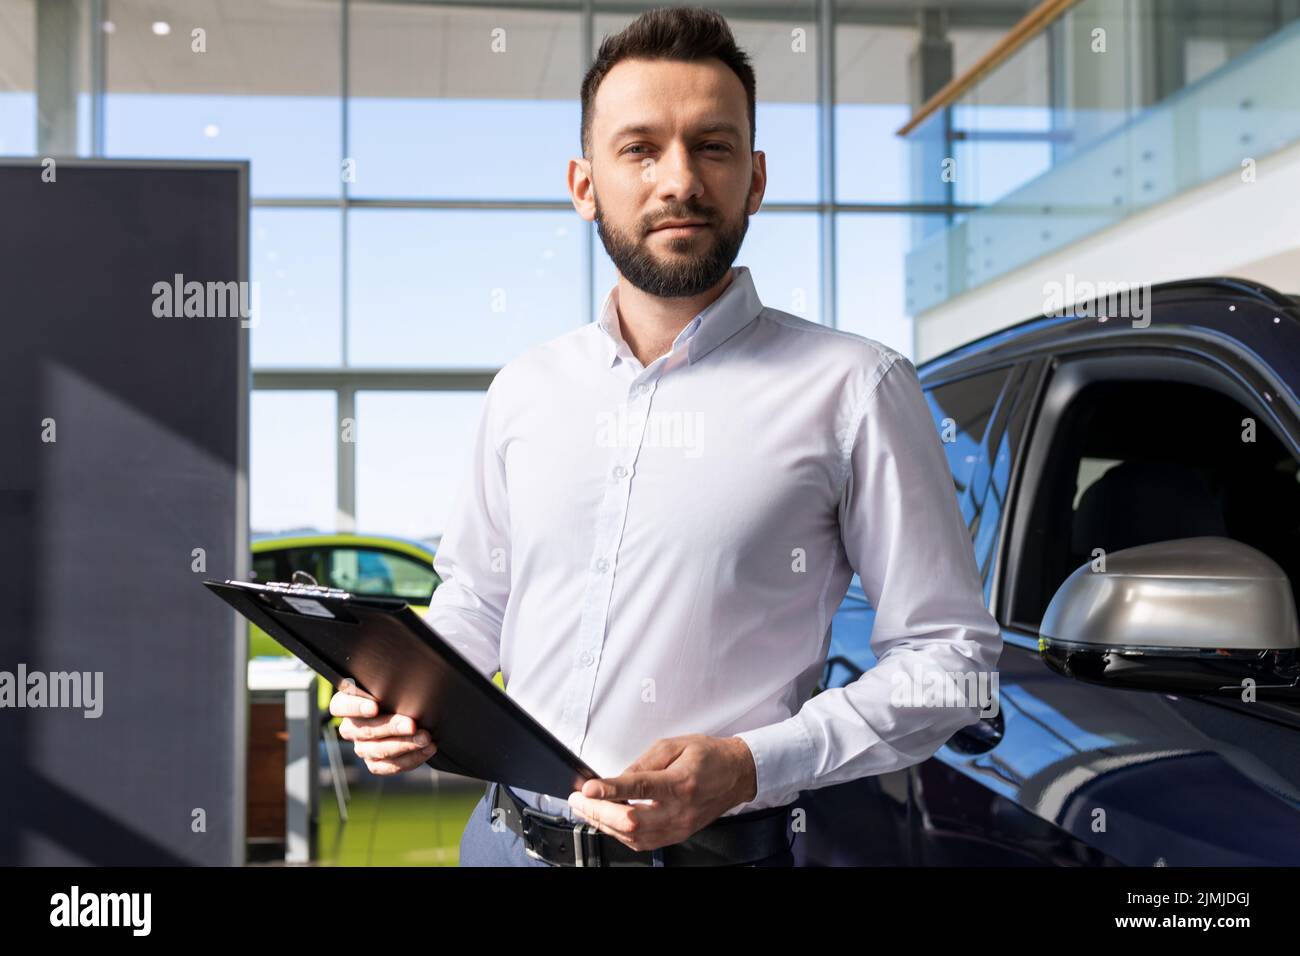 Manager in a car dealership prepares papers for buying a new car Stock Photo